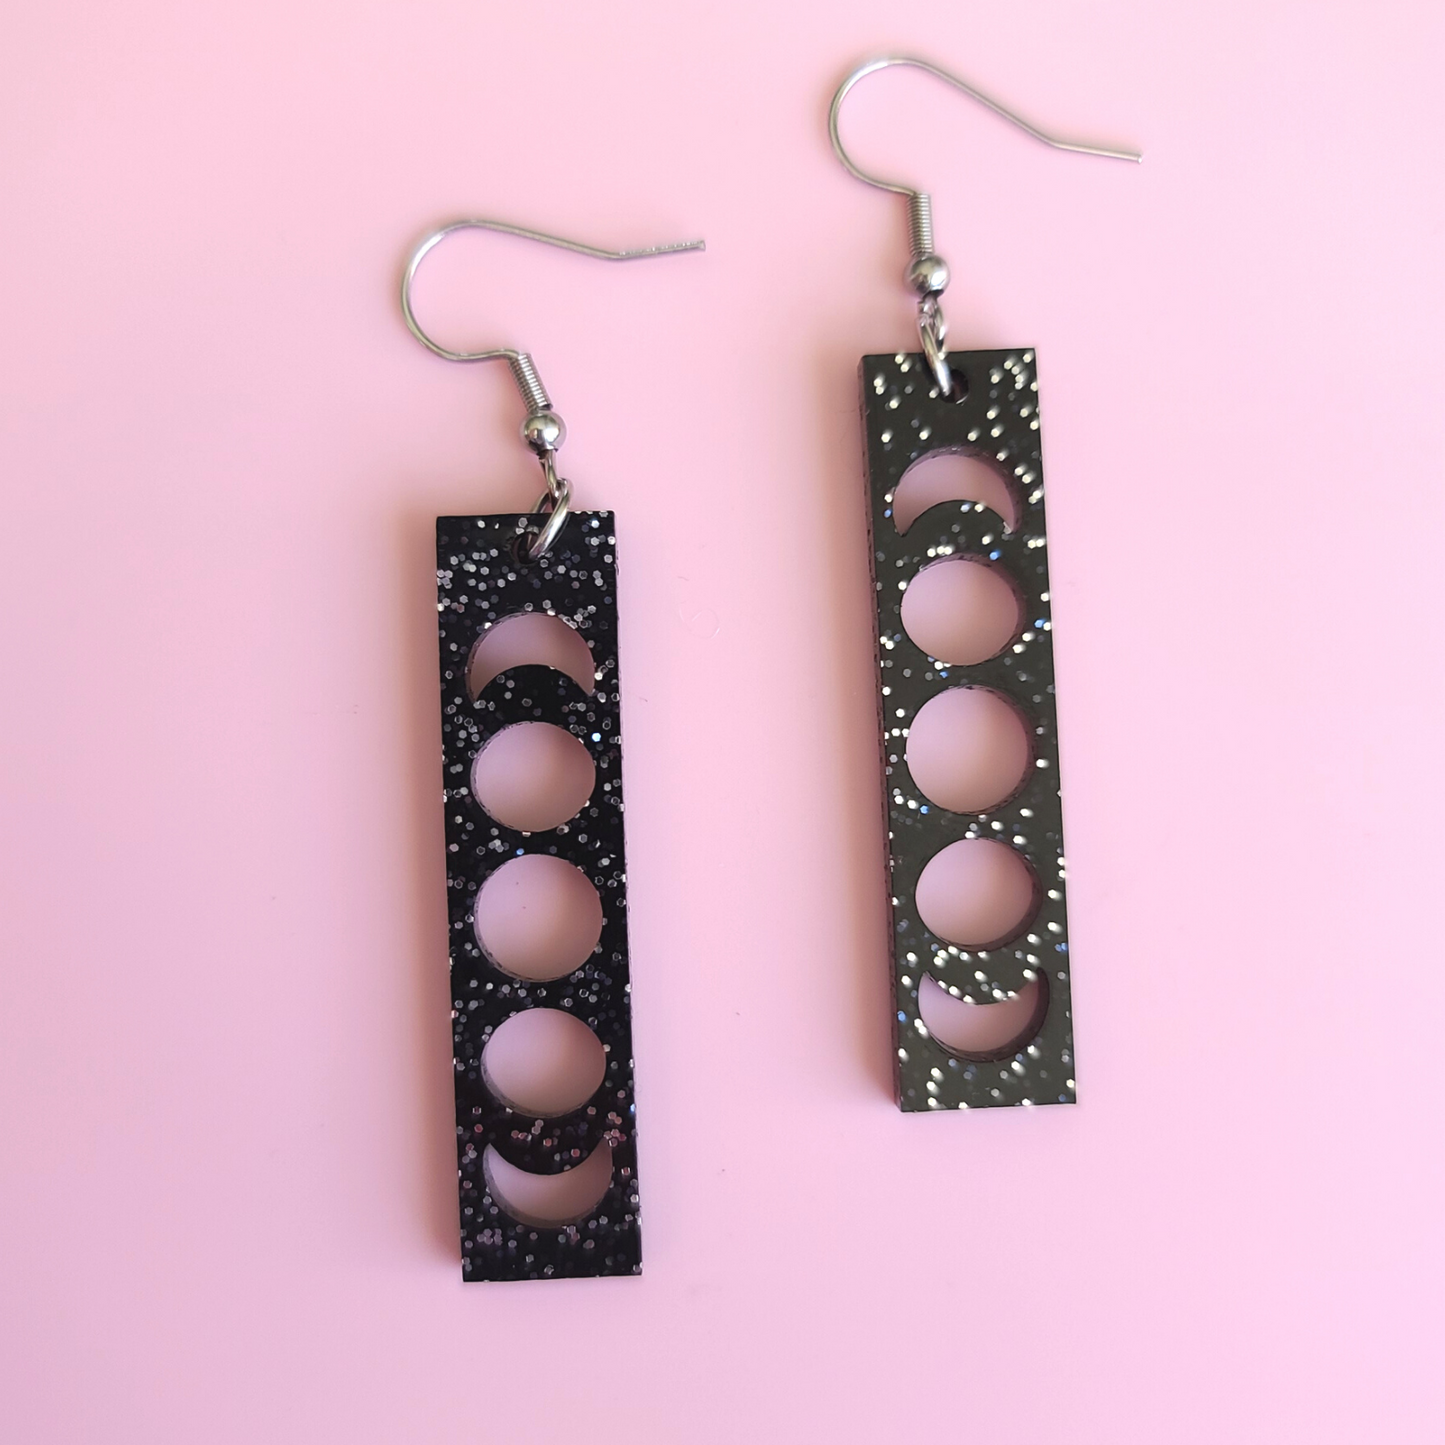 Phases of the Moon on Black Glitter Acrylic - Earrings - Laser Cut